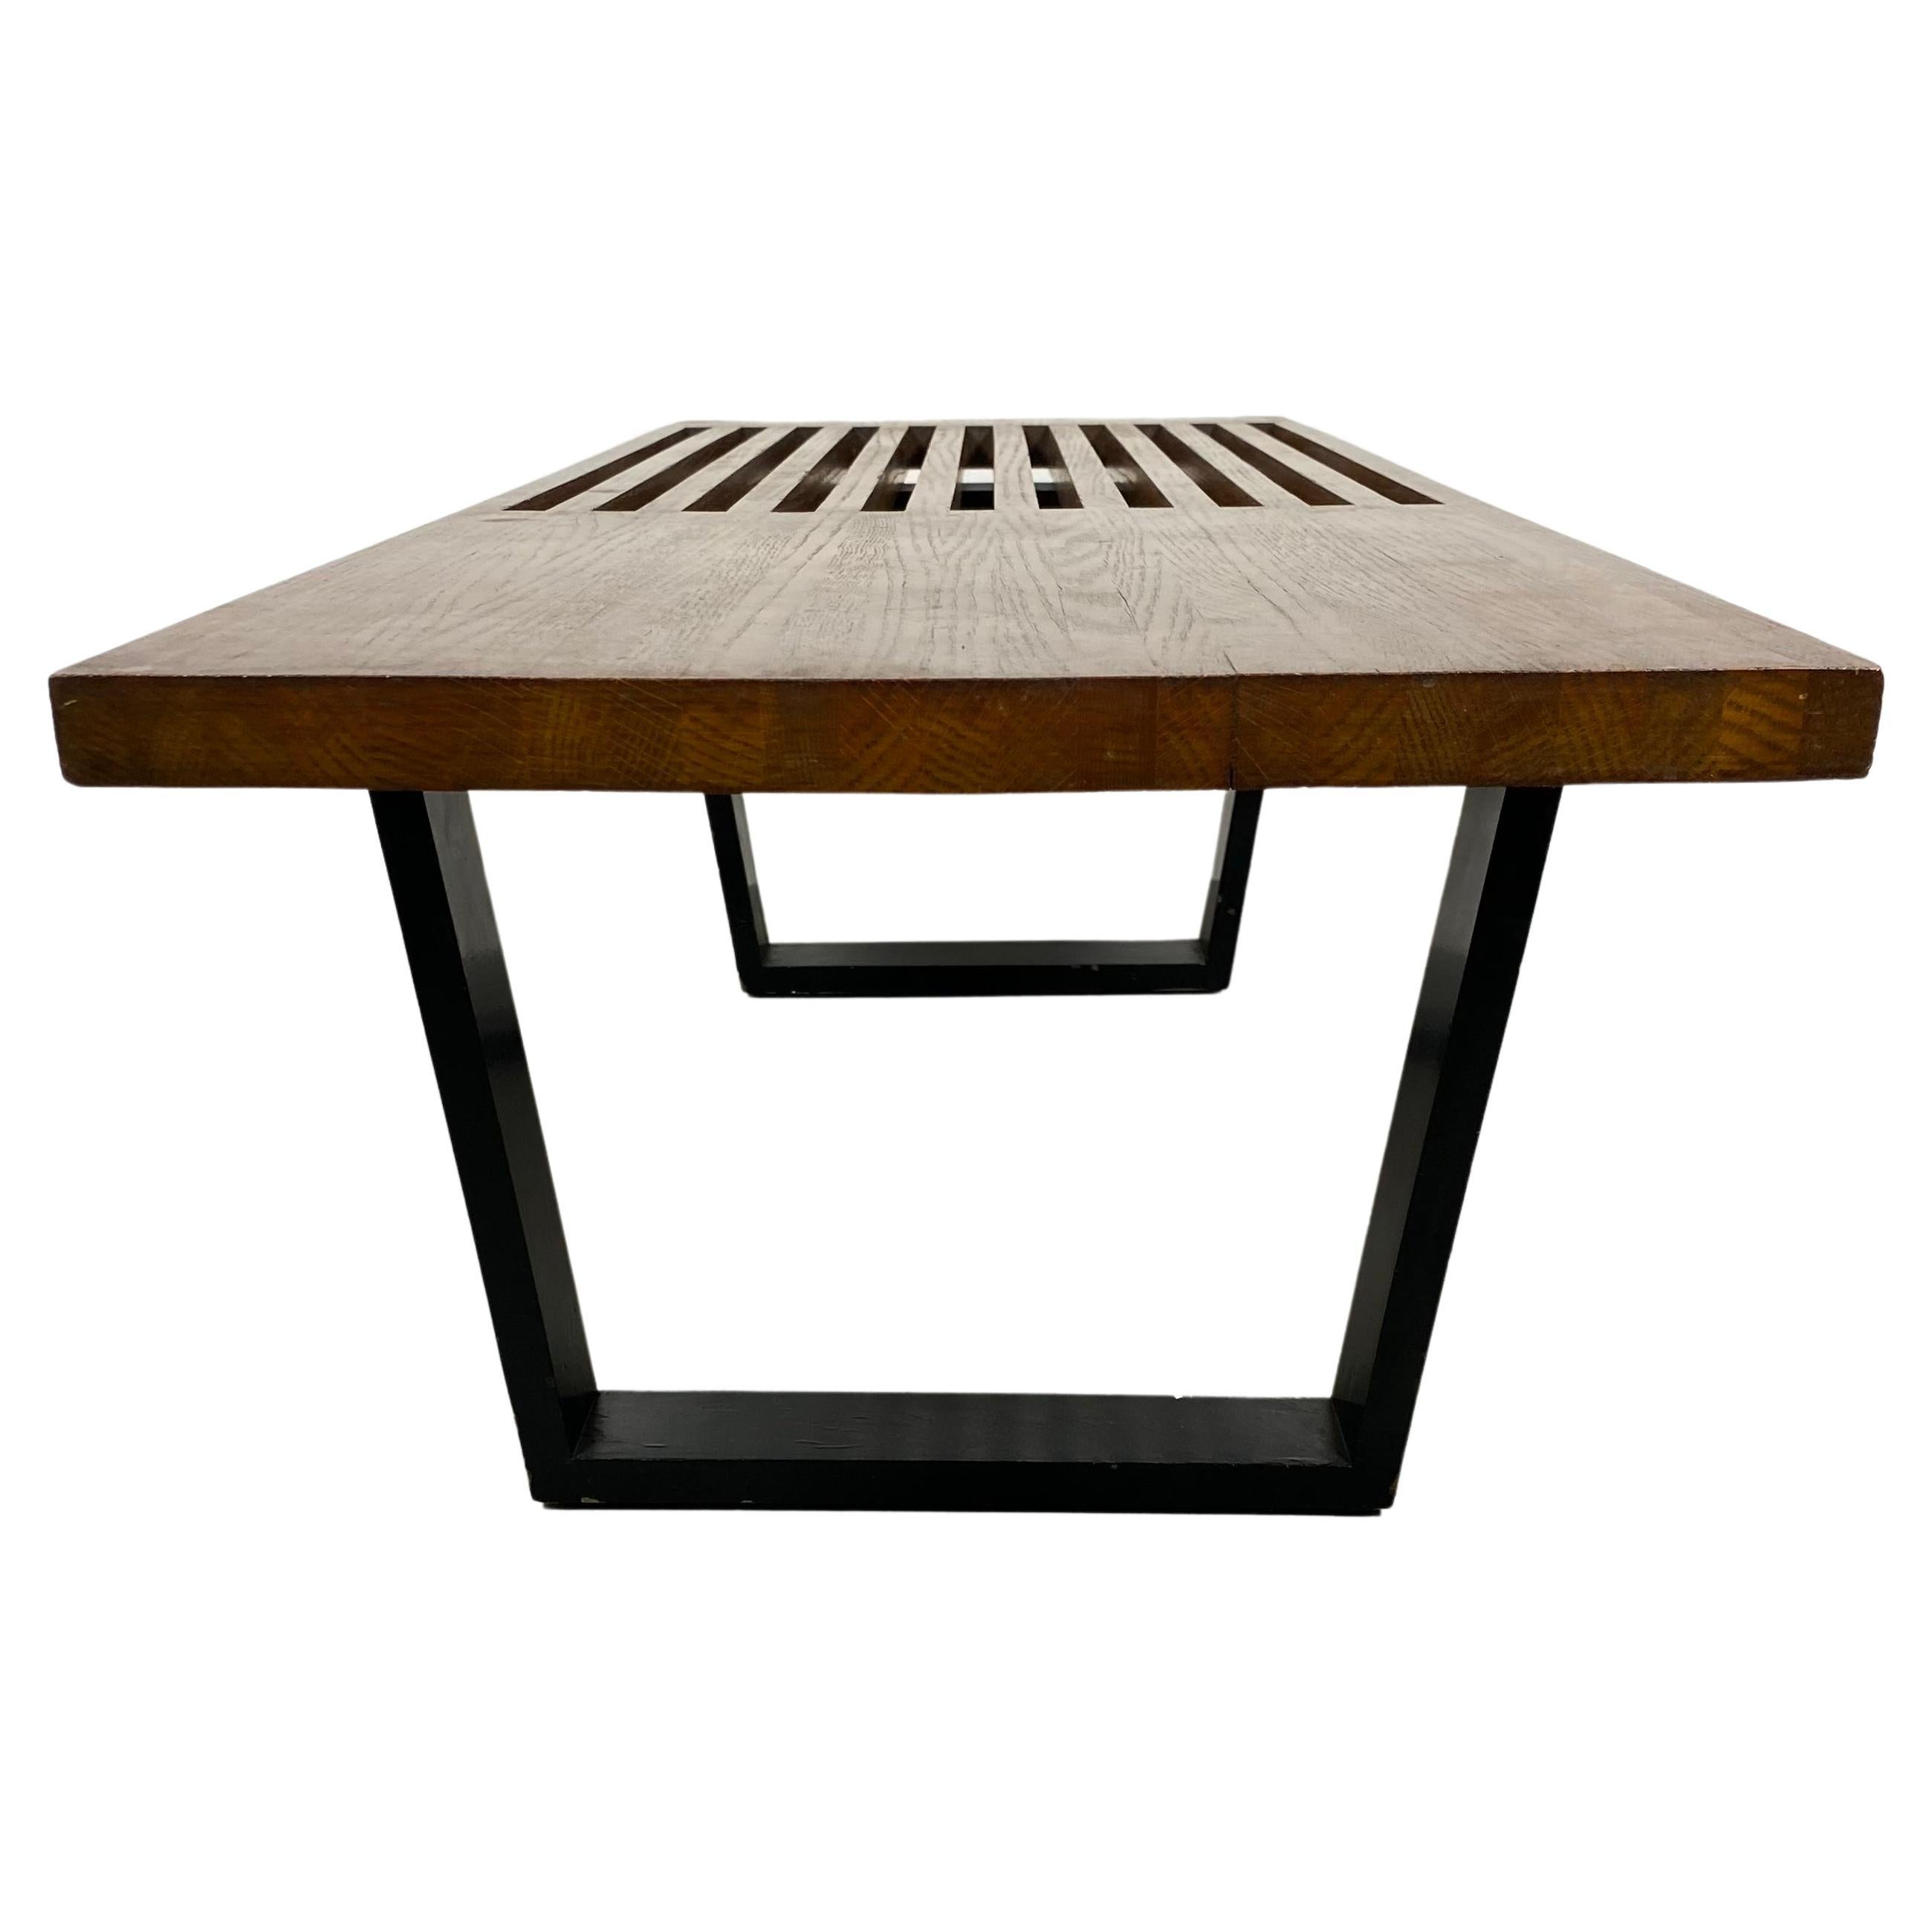 Classic Modernist Slat Bench / Cocktail Table After George Nelson For Sale